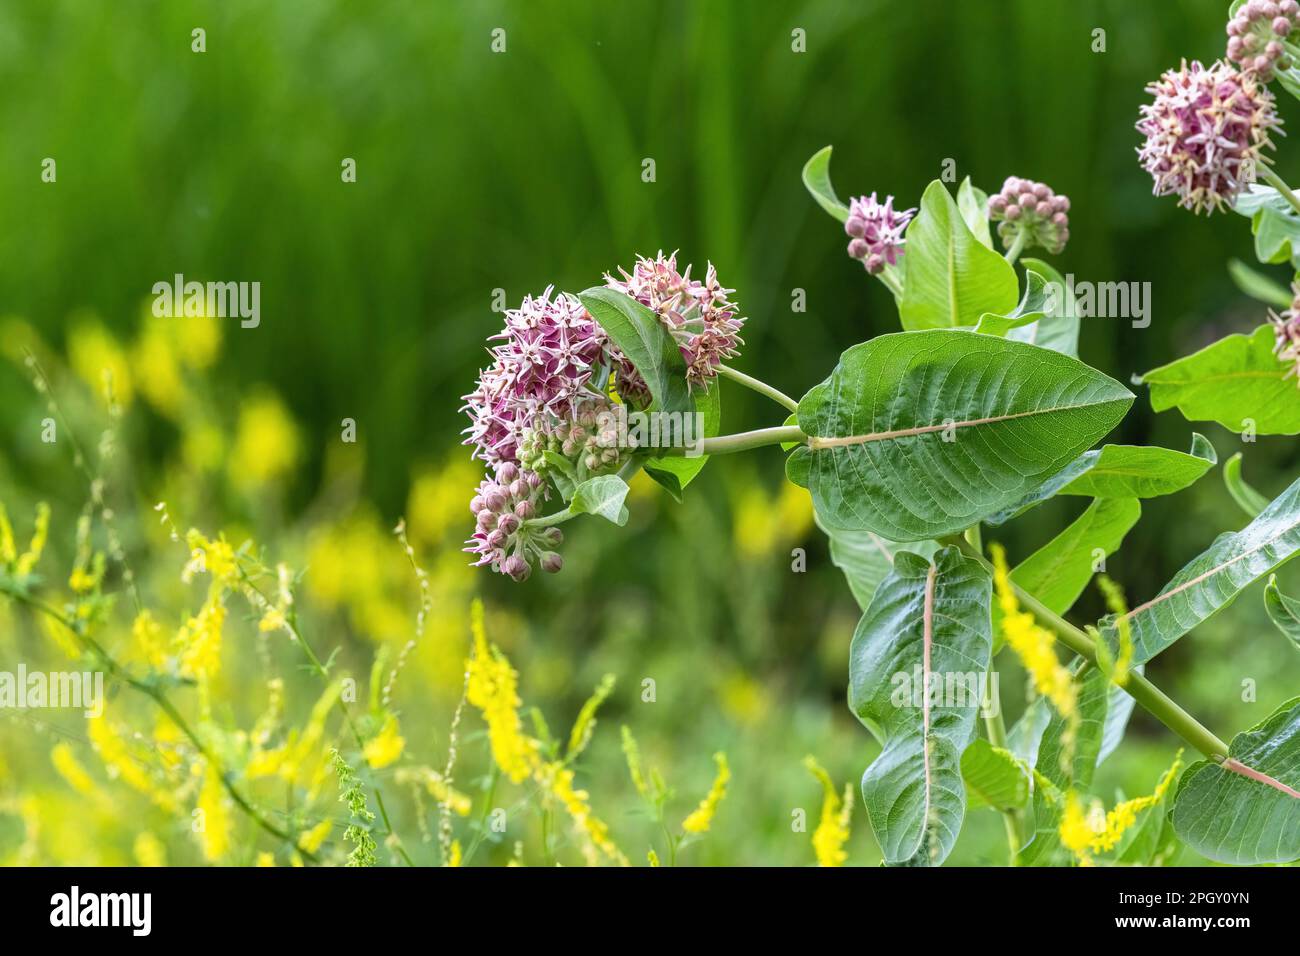 A Showy Milkweed plant (Asclepias speciosa) with clusters of blooming flower heads growing in a wild natural habitat. Stock Photo